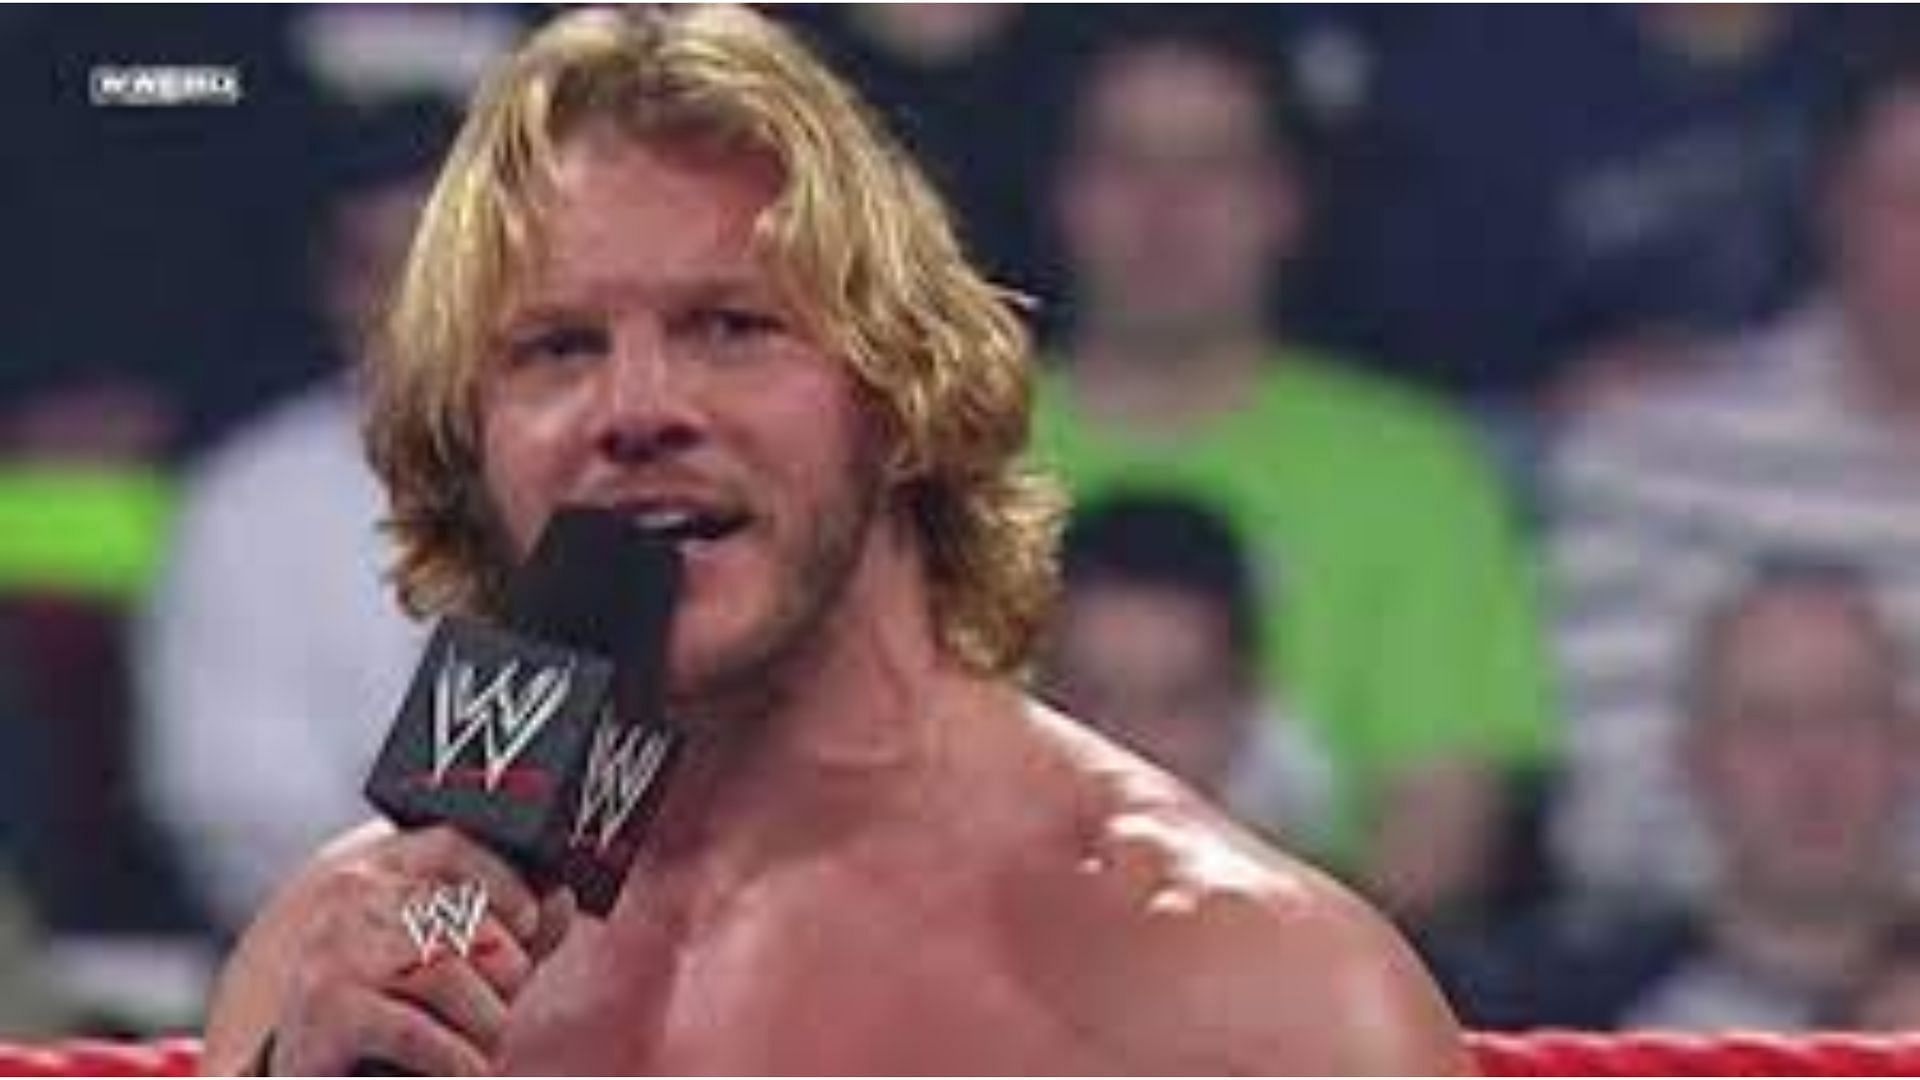 Chris Jericho left the WWE mid-2005, only to return two years later.